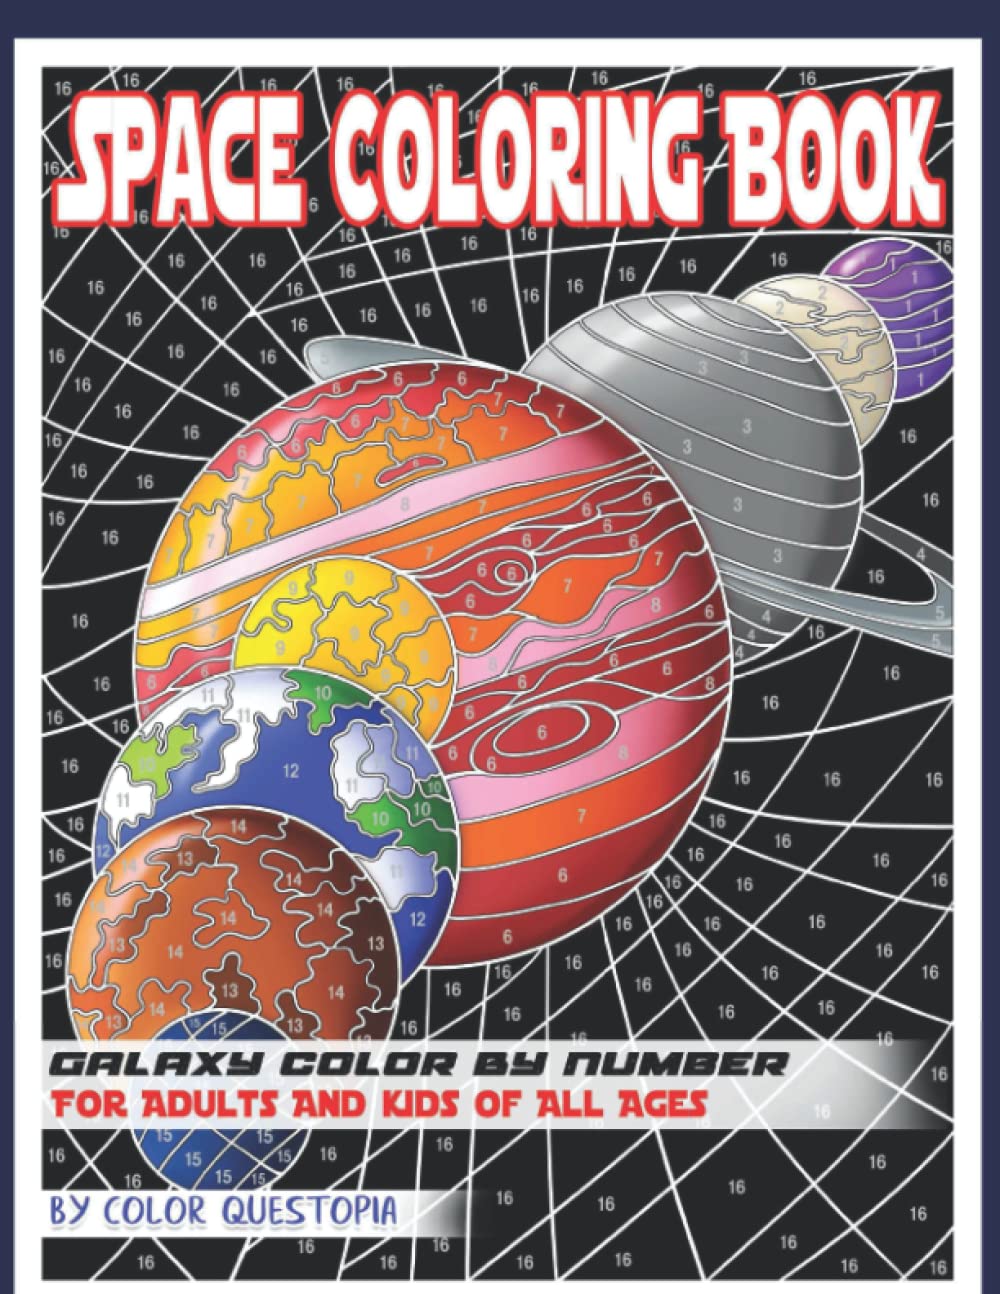 Space Coloring Book For Adults For Adults And Kids of All Ages - Galaxy Color by Number: Planets and Stars to Discover (Adult Color By Number)